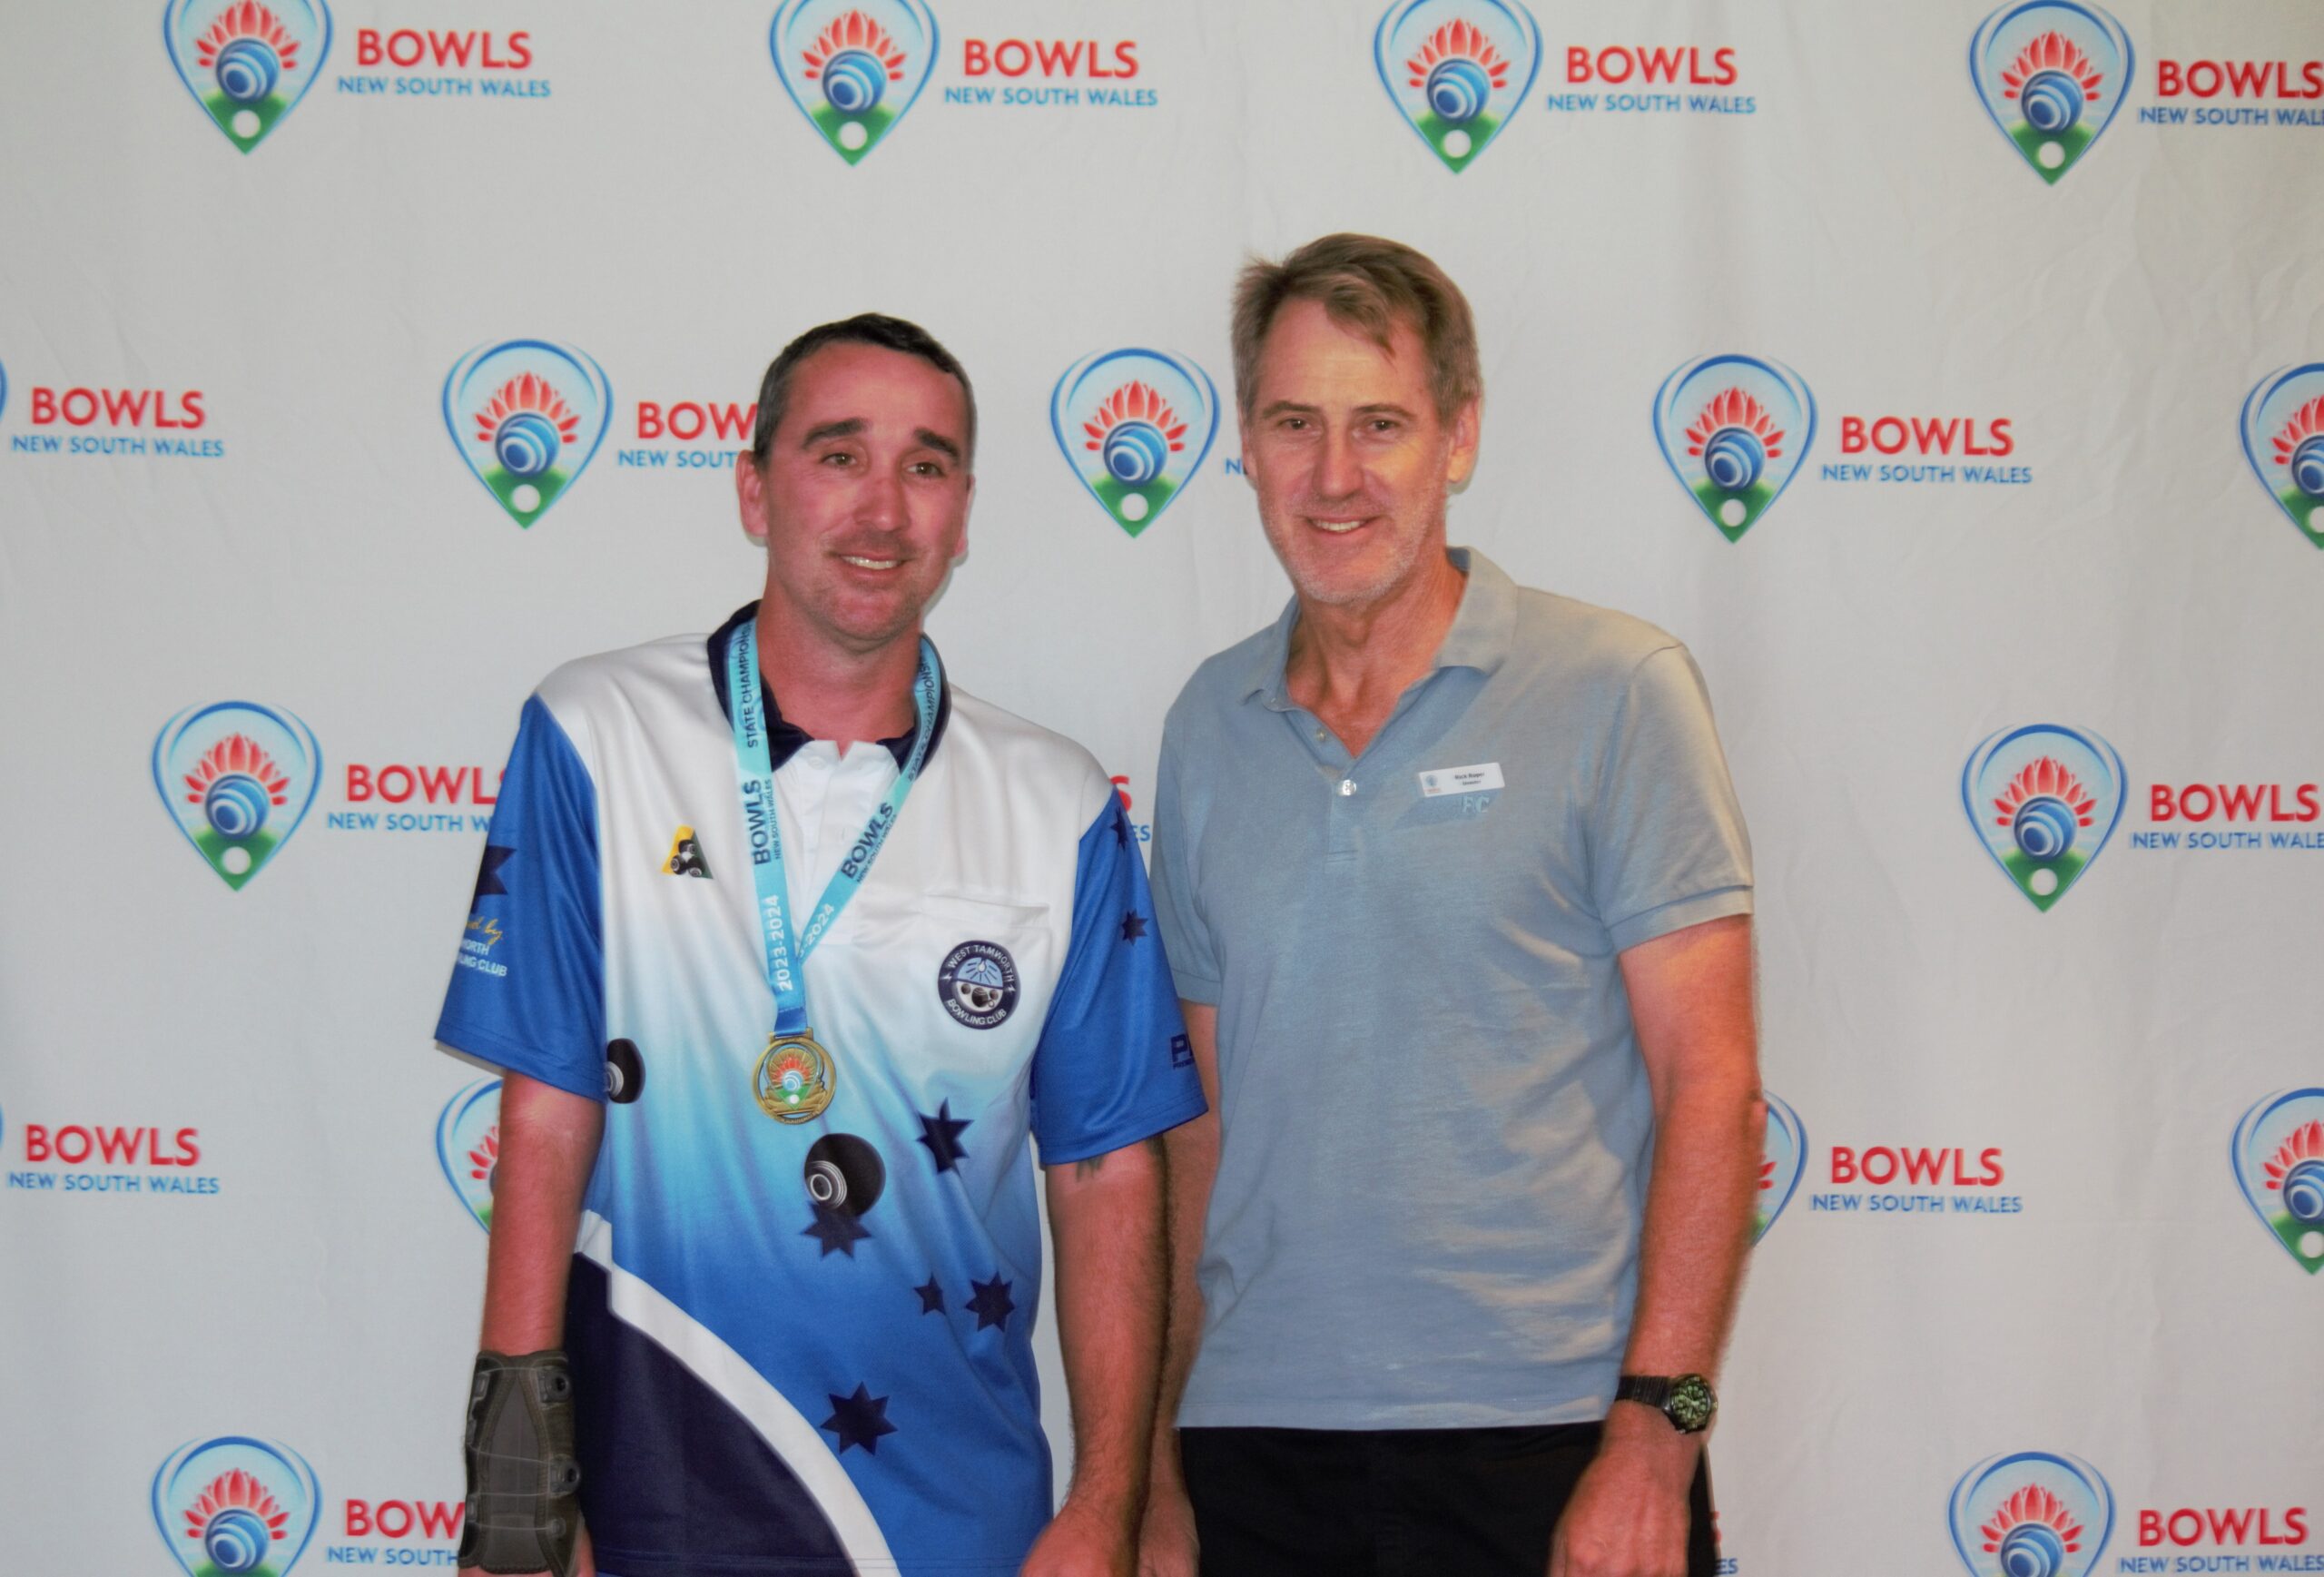 Aaron Kelly - Multi-Disability Open Singles Champion pictured with Bowls NSW Board member Rick Roper